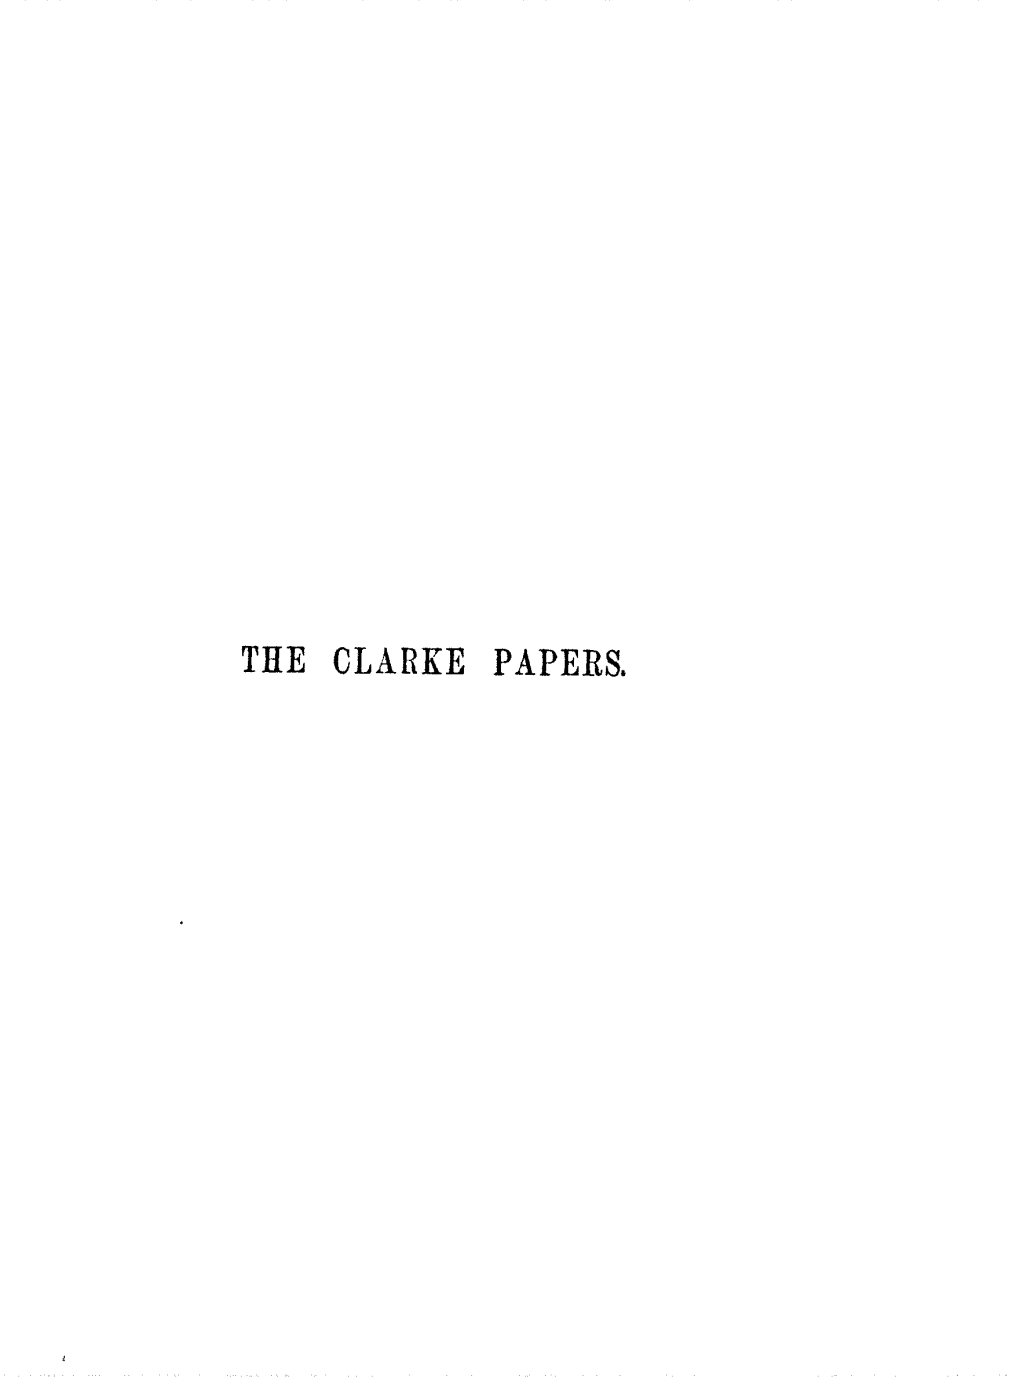 Tite CLARKE PAPERS. 167956